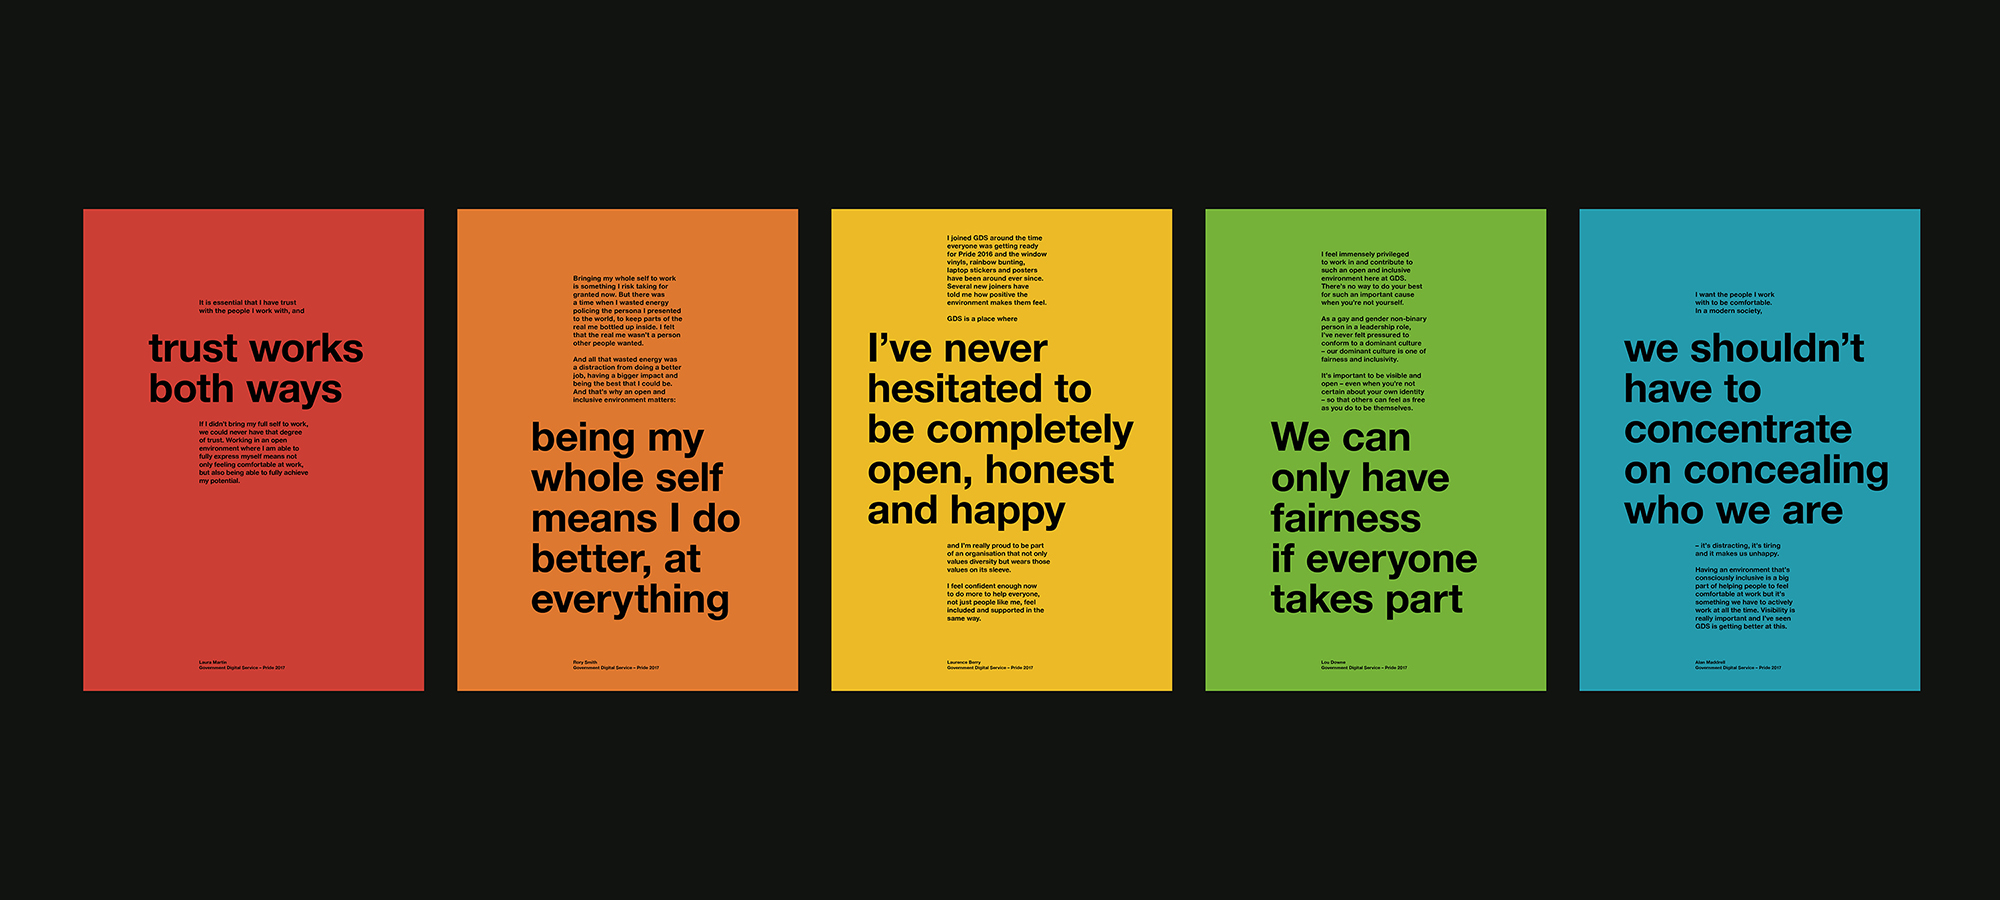 Posters showing quotes by LGBT+ people